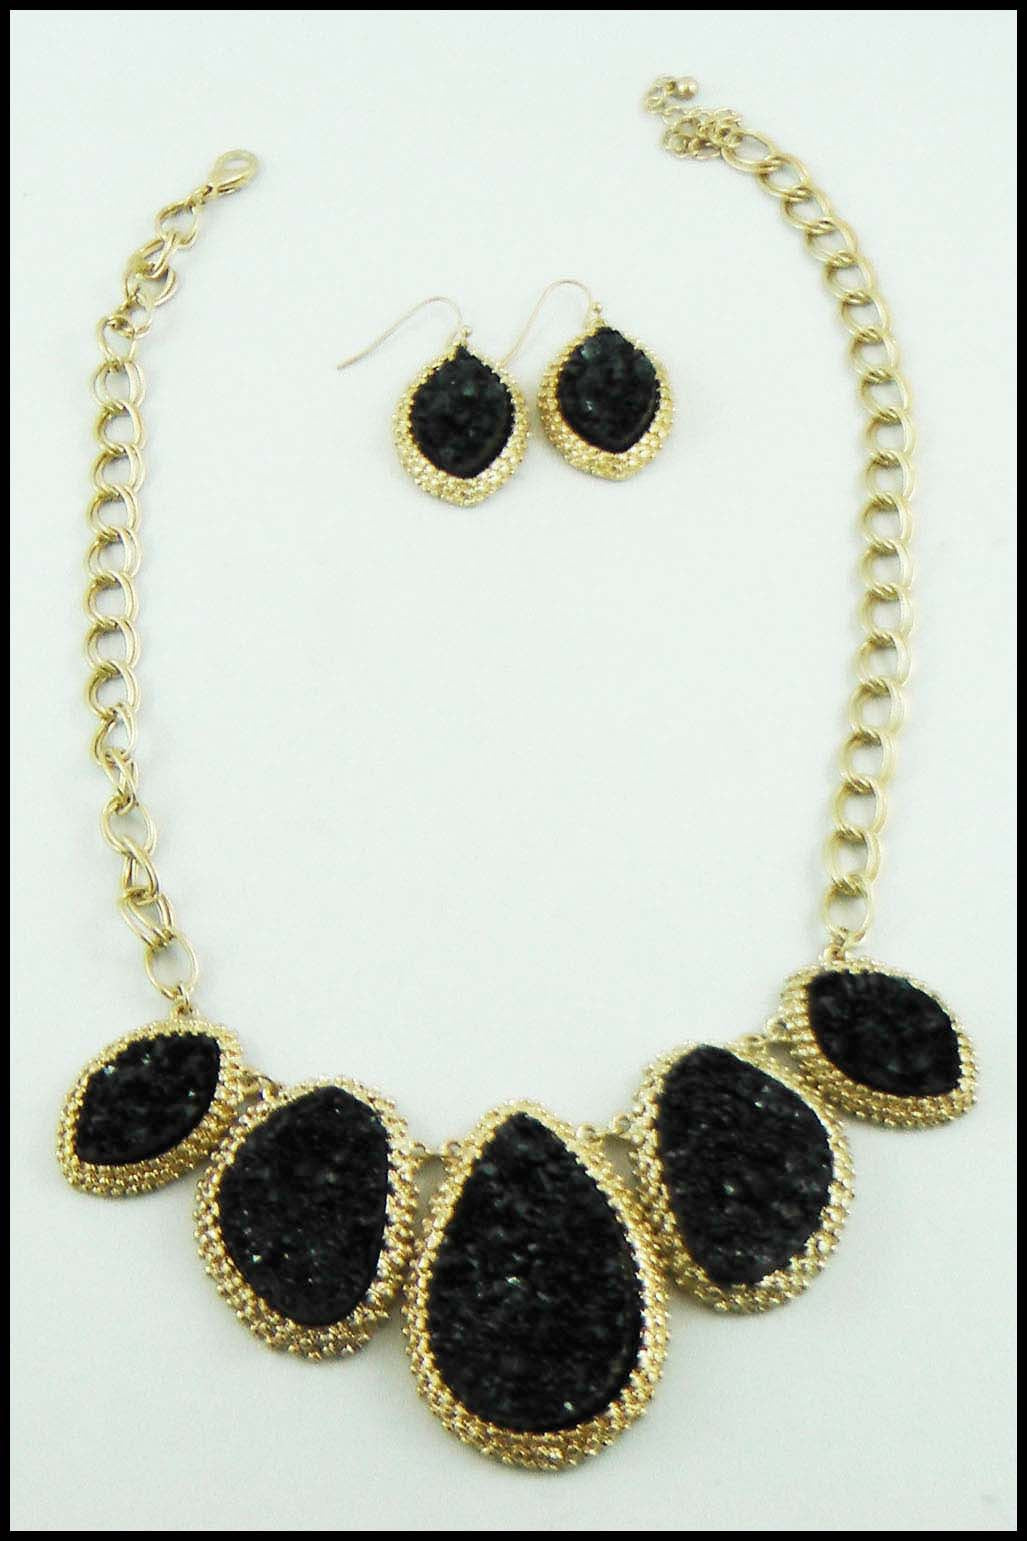 Jagged Stone Necklace and Earring Set